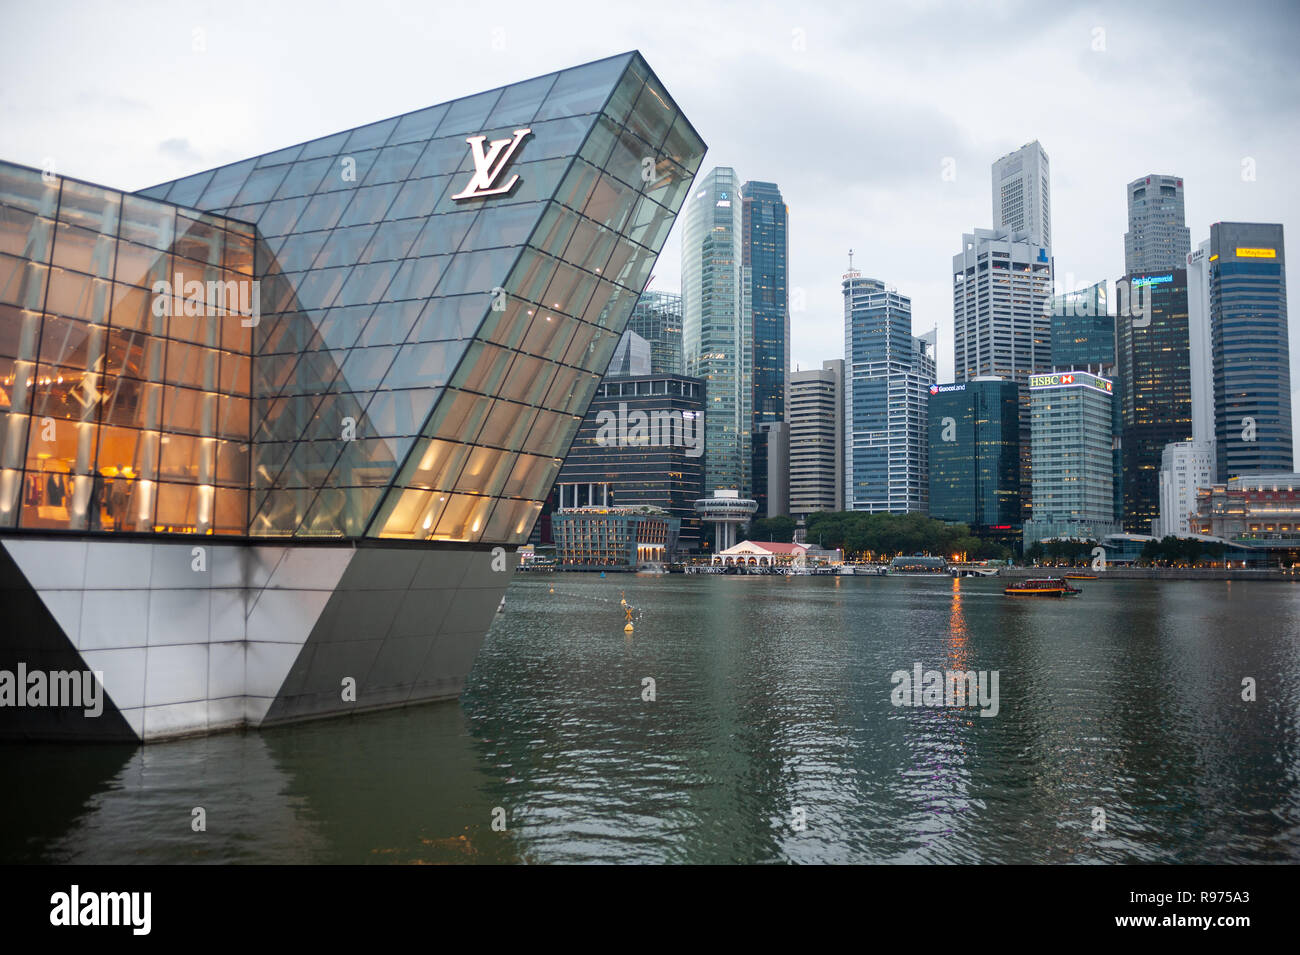 Louis Vuitton Fashion Tour Container in Singapore — Photographer based in  Singapore. Specialise in industrial and architecture interior